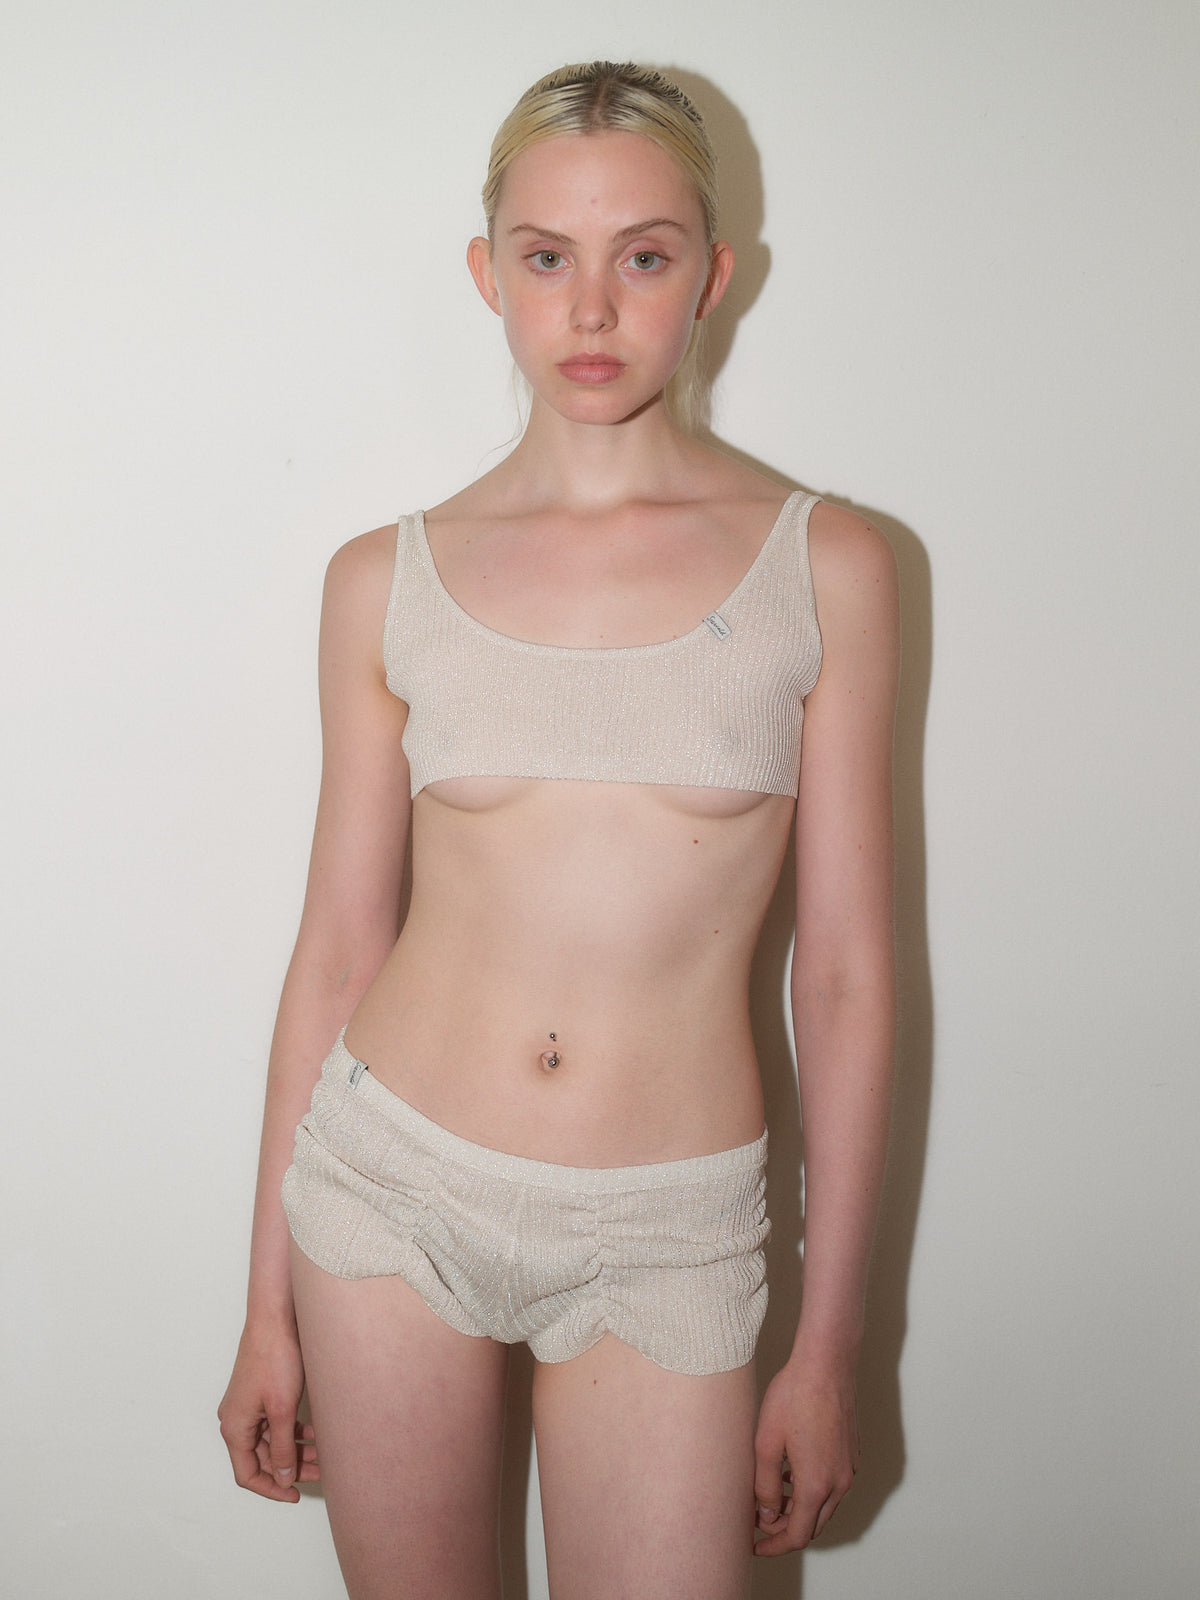 Knitted Micro Bra designed by Christina Seewald. Sustainable, designed and made in Europe. Best Quality Yarns from Italy.